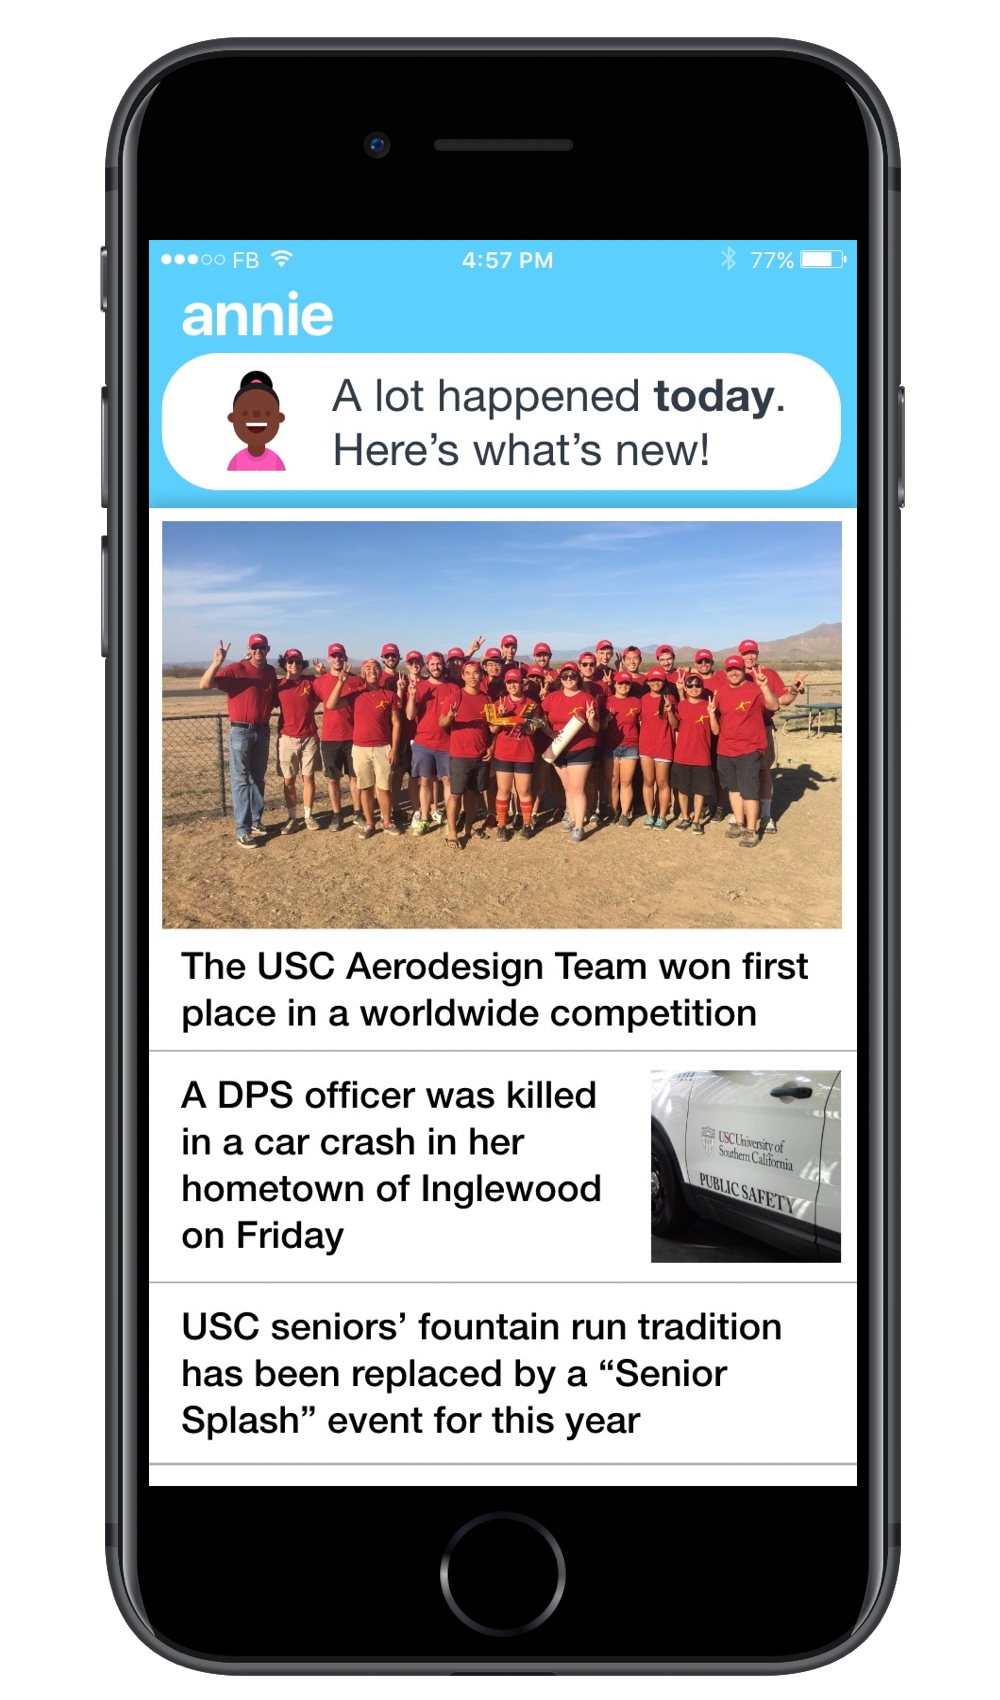 The Annie home screen, showing a few USC news stories.